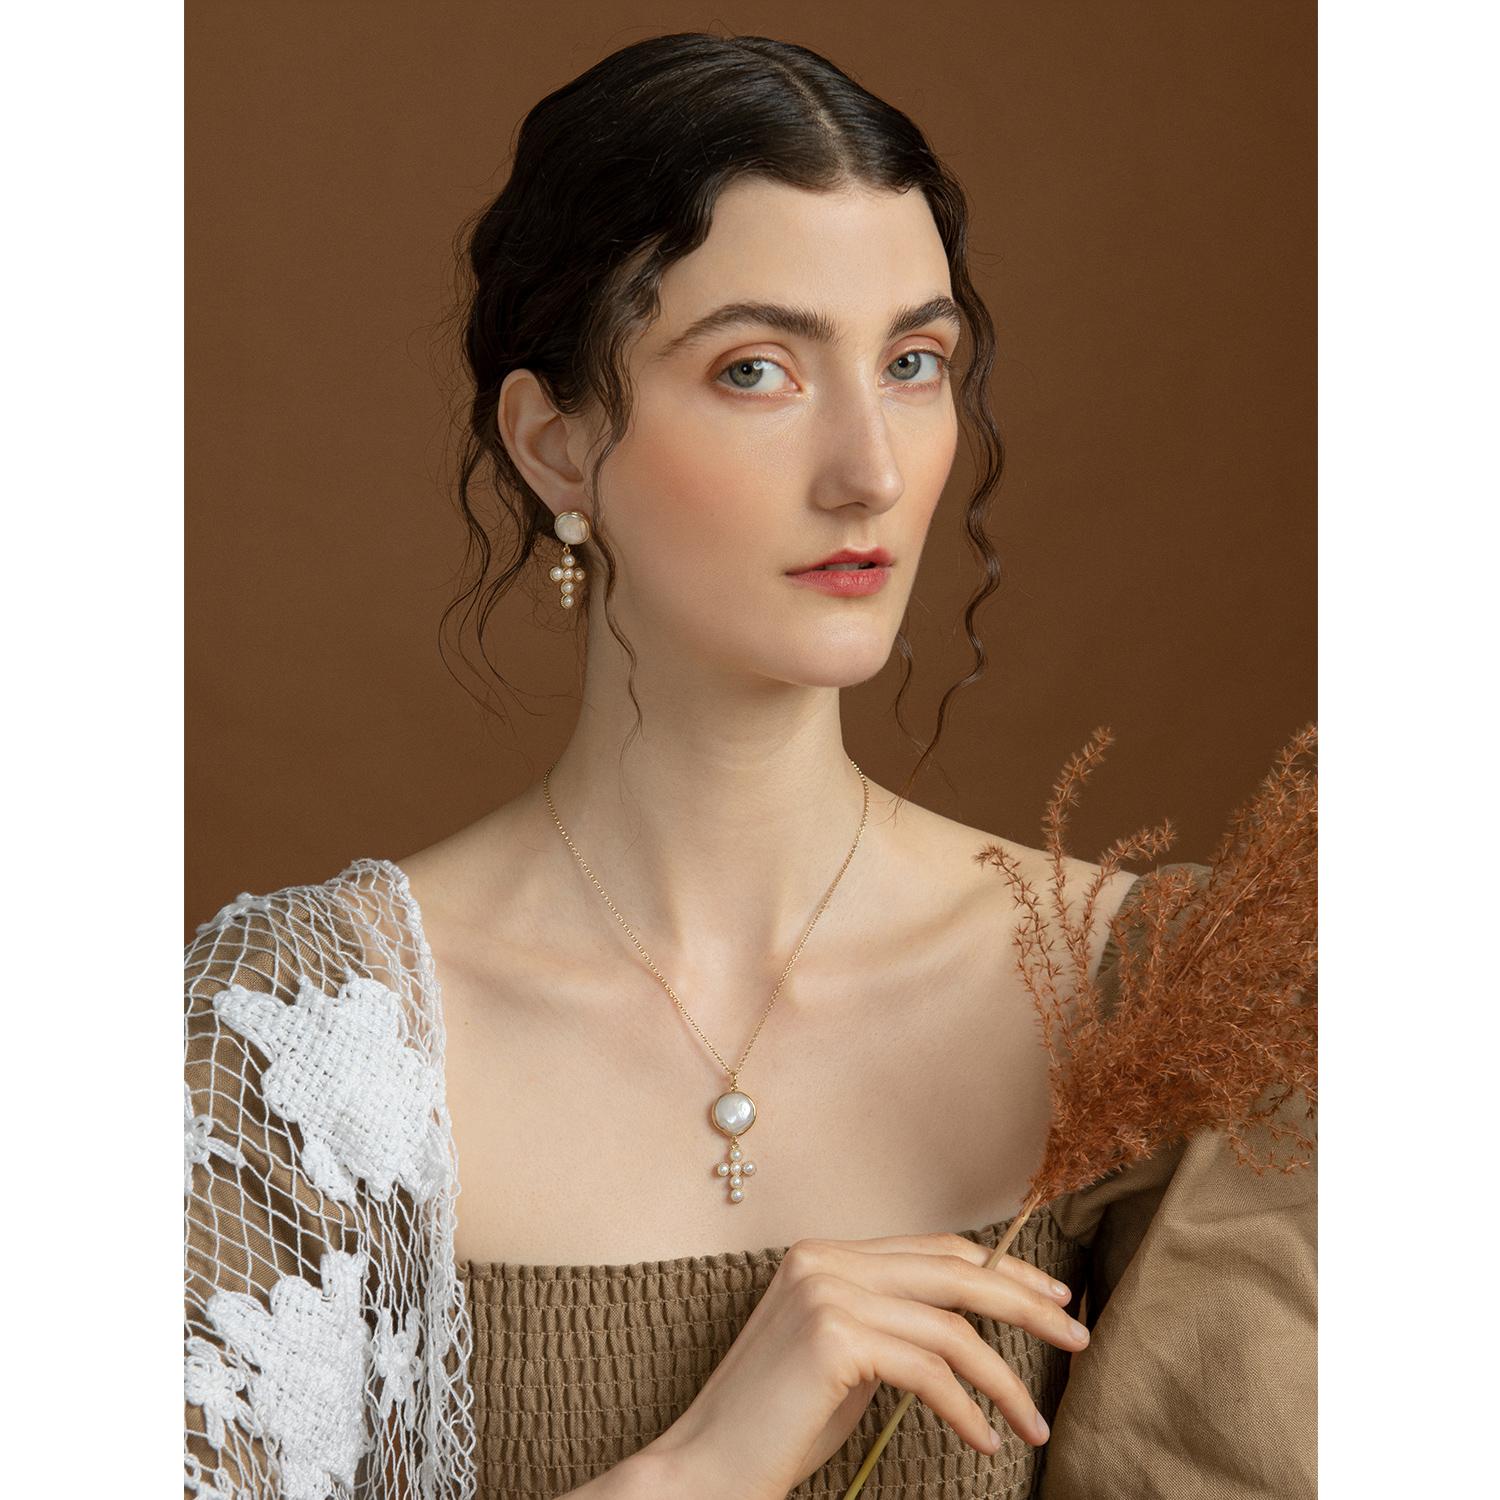 Handmade in Italy from 18-karat gold-plated silver, these pair of earrings from the Hope collection by Vintouch Jewels are balanced by a single one-of-a-kind baroque pearl and a dainty cross pendant enriched by lustrous freshwater pearls. Each pearl